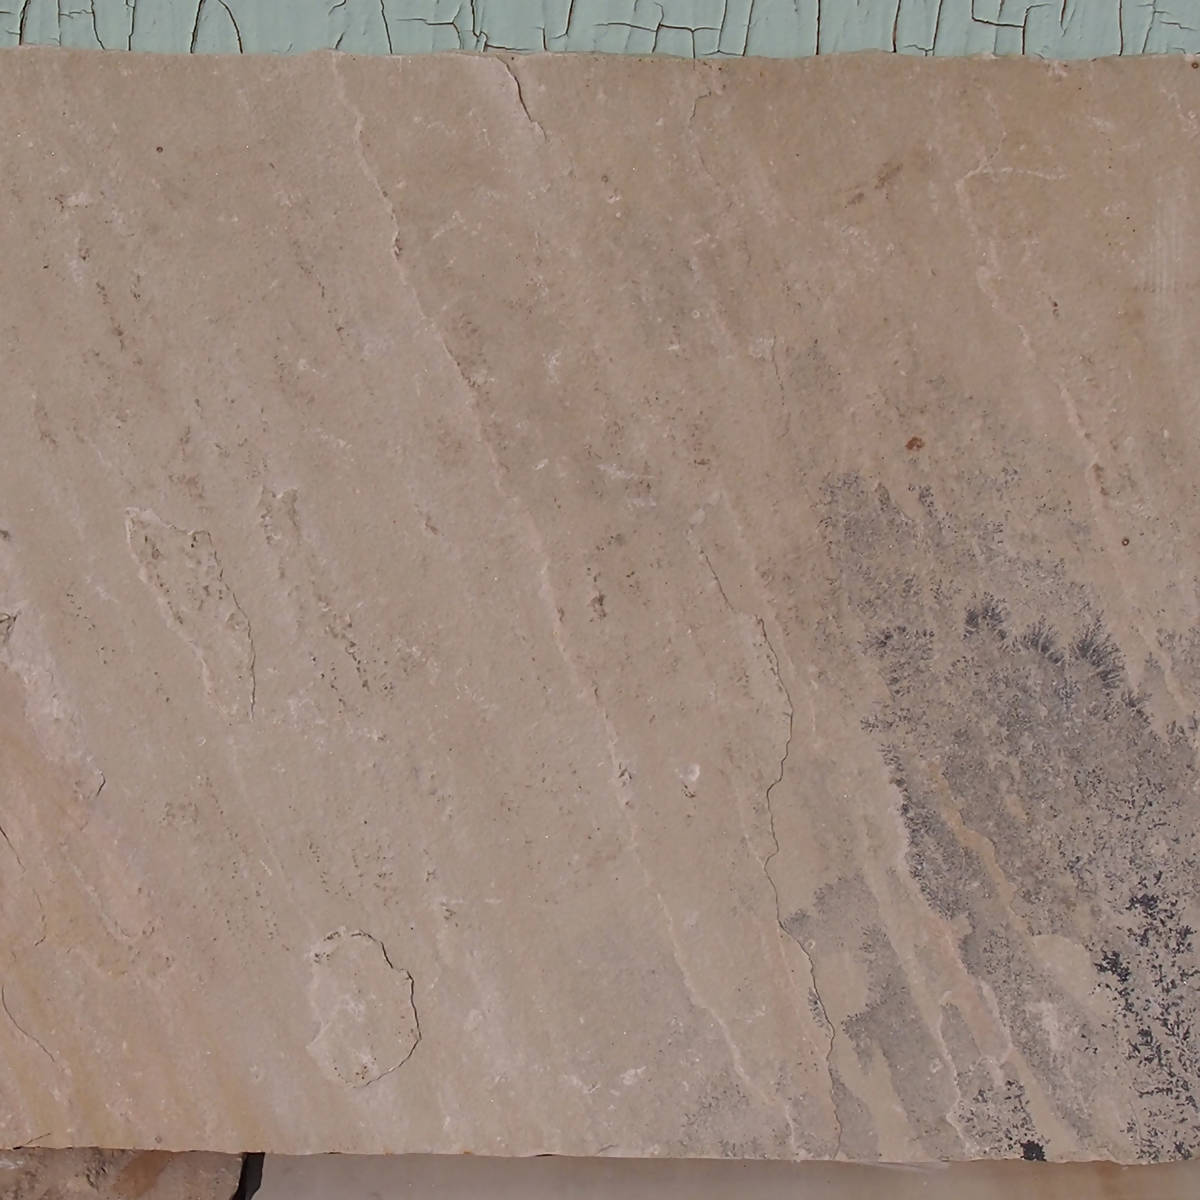 MINT FOSSIL CALIBRATED,Sandstone,Work-Tops,www.work-tops.com